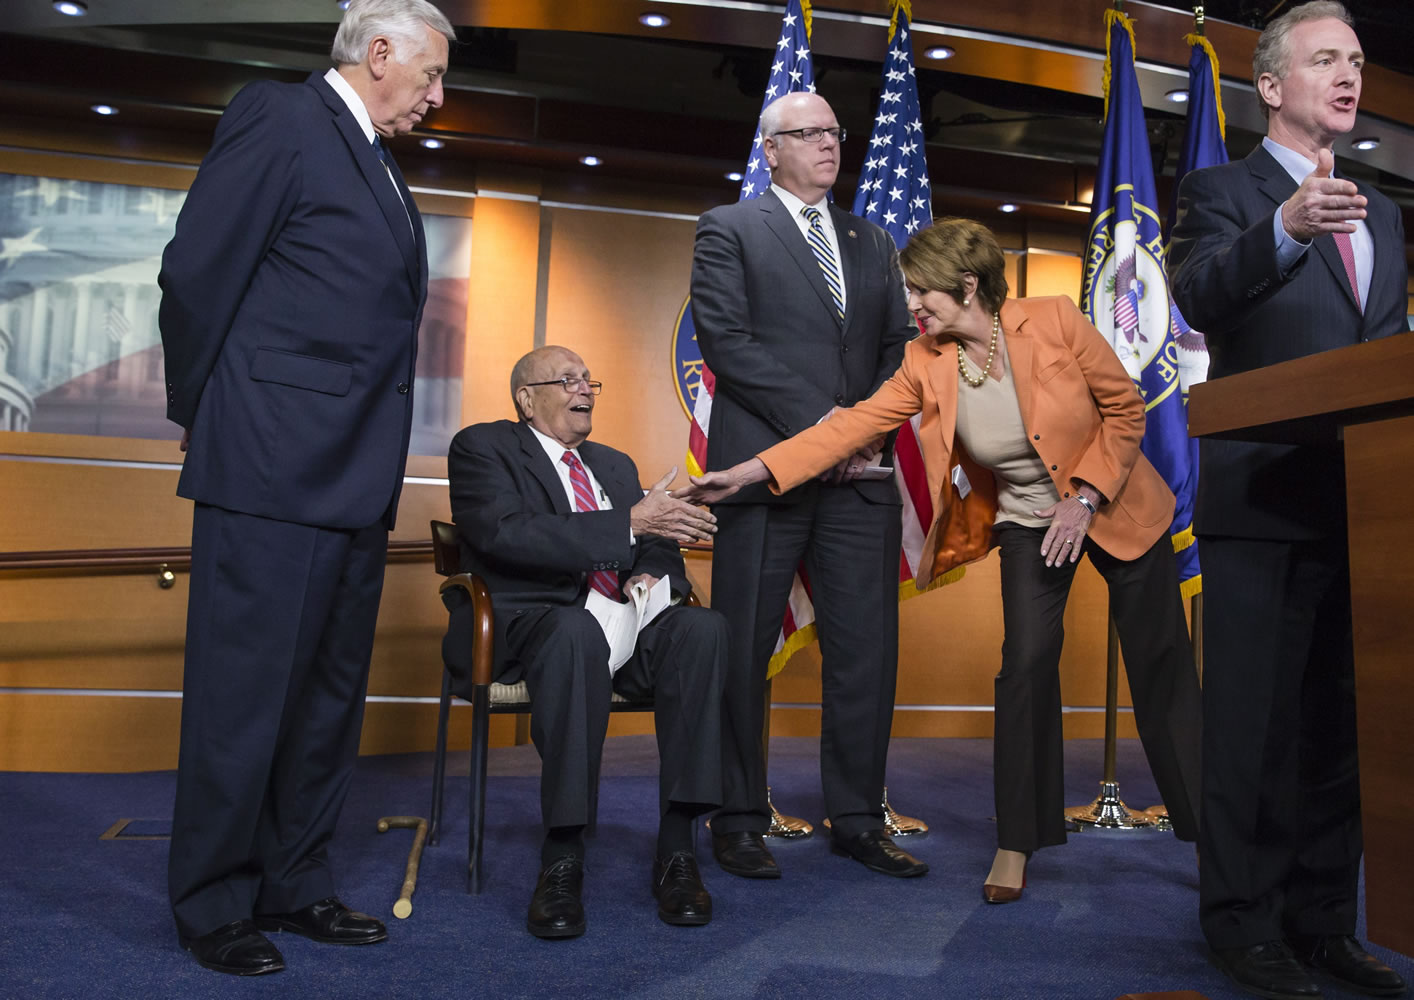 House Minority Leader Nancy Pelosi of Calif., reaches out to shake hands with Rep. John Dingell, D-Mich., the longest-serving member of Congress in history, at a news conference in October on Capitol Hill in Washington. From left are Minority Whip Steny Hoyer, D-Md., Rep. John Dingell, D-Mich., Rep. Joseph Crowley, D-N.Y., House Minority Leader Nancy Pelosi, D-Calif., and Rep.